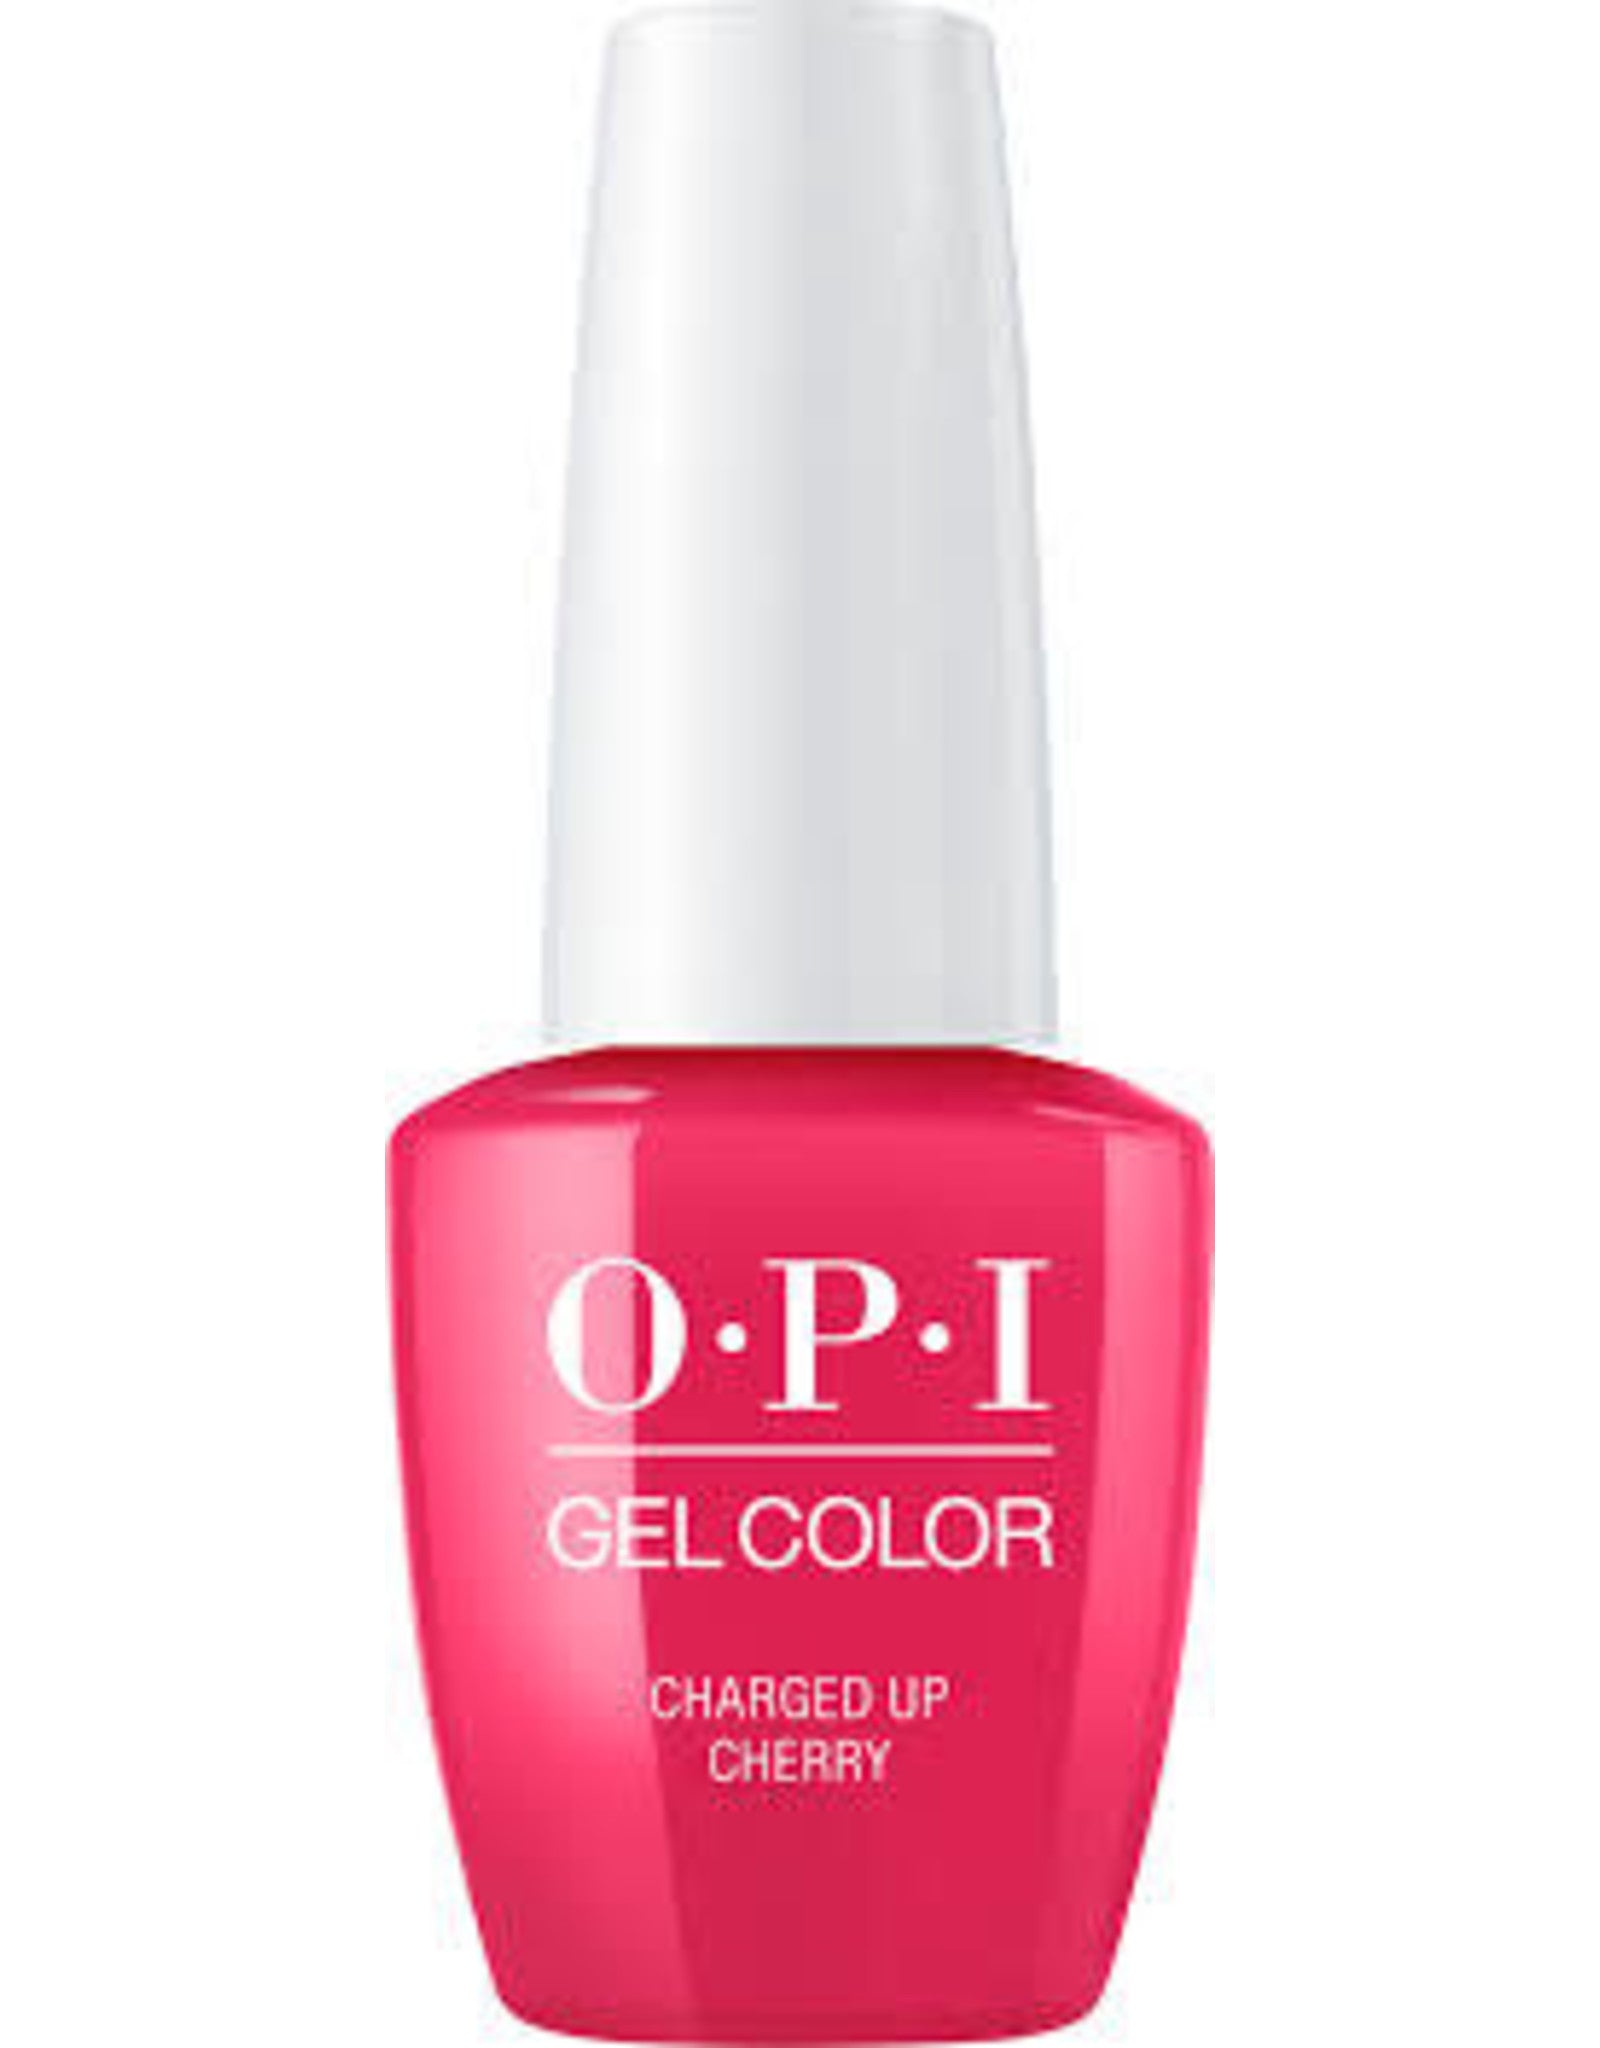 OPI Gel Color GC B35 - CHARGED UP CHERRY